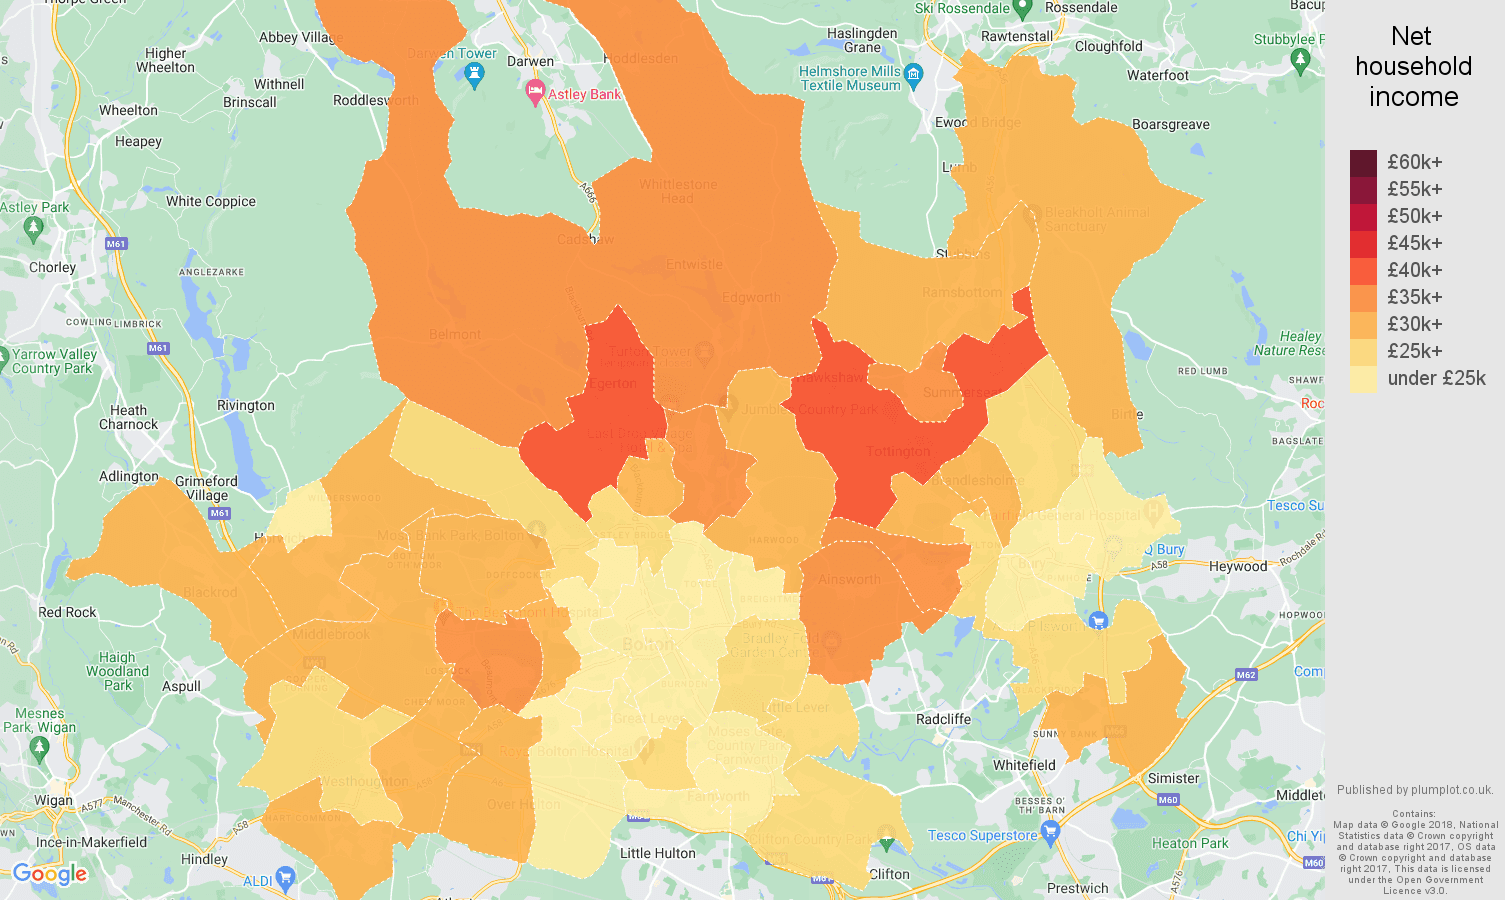 Bolton net household income map